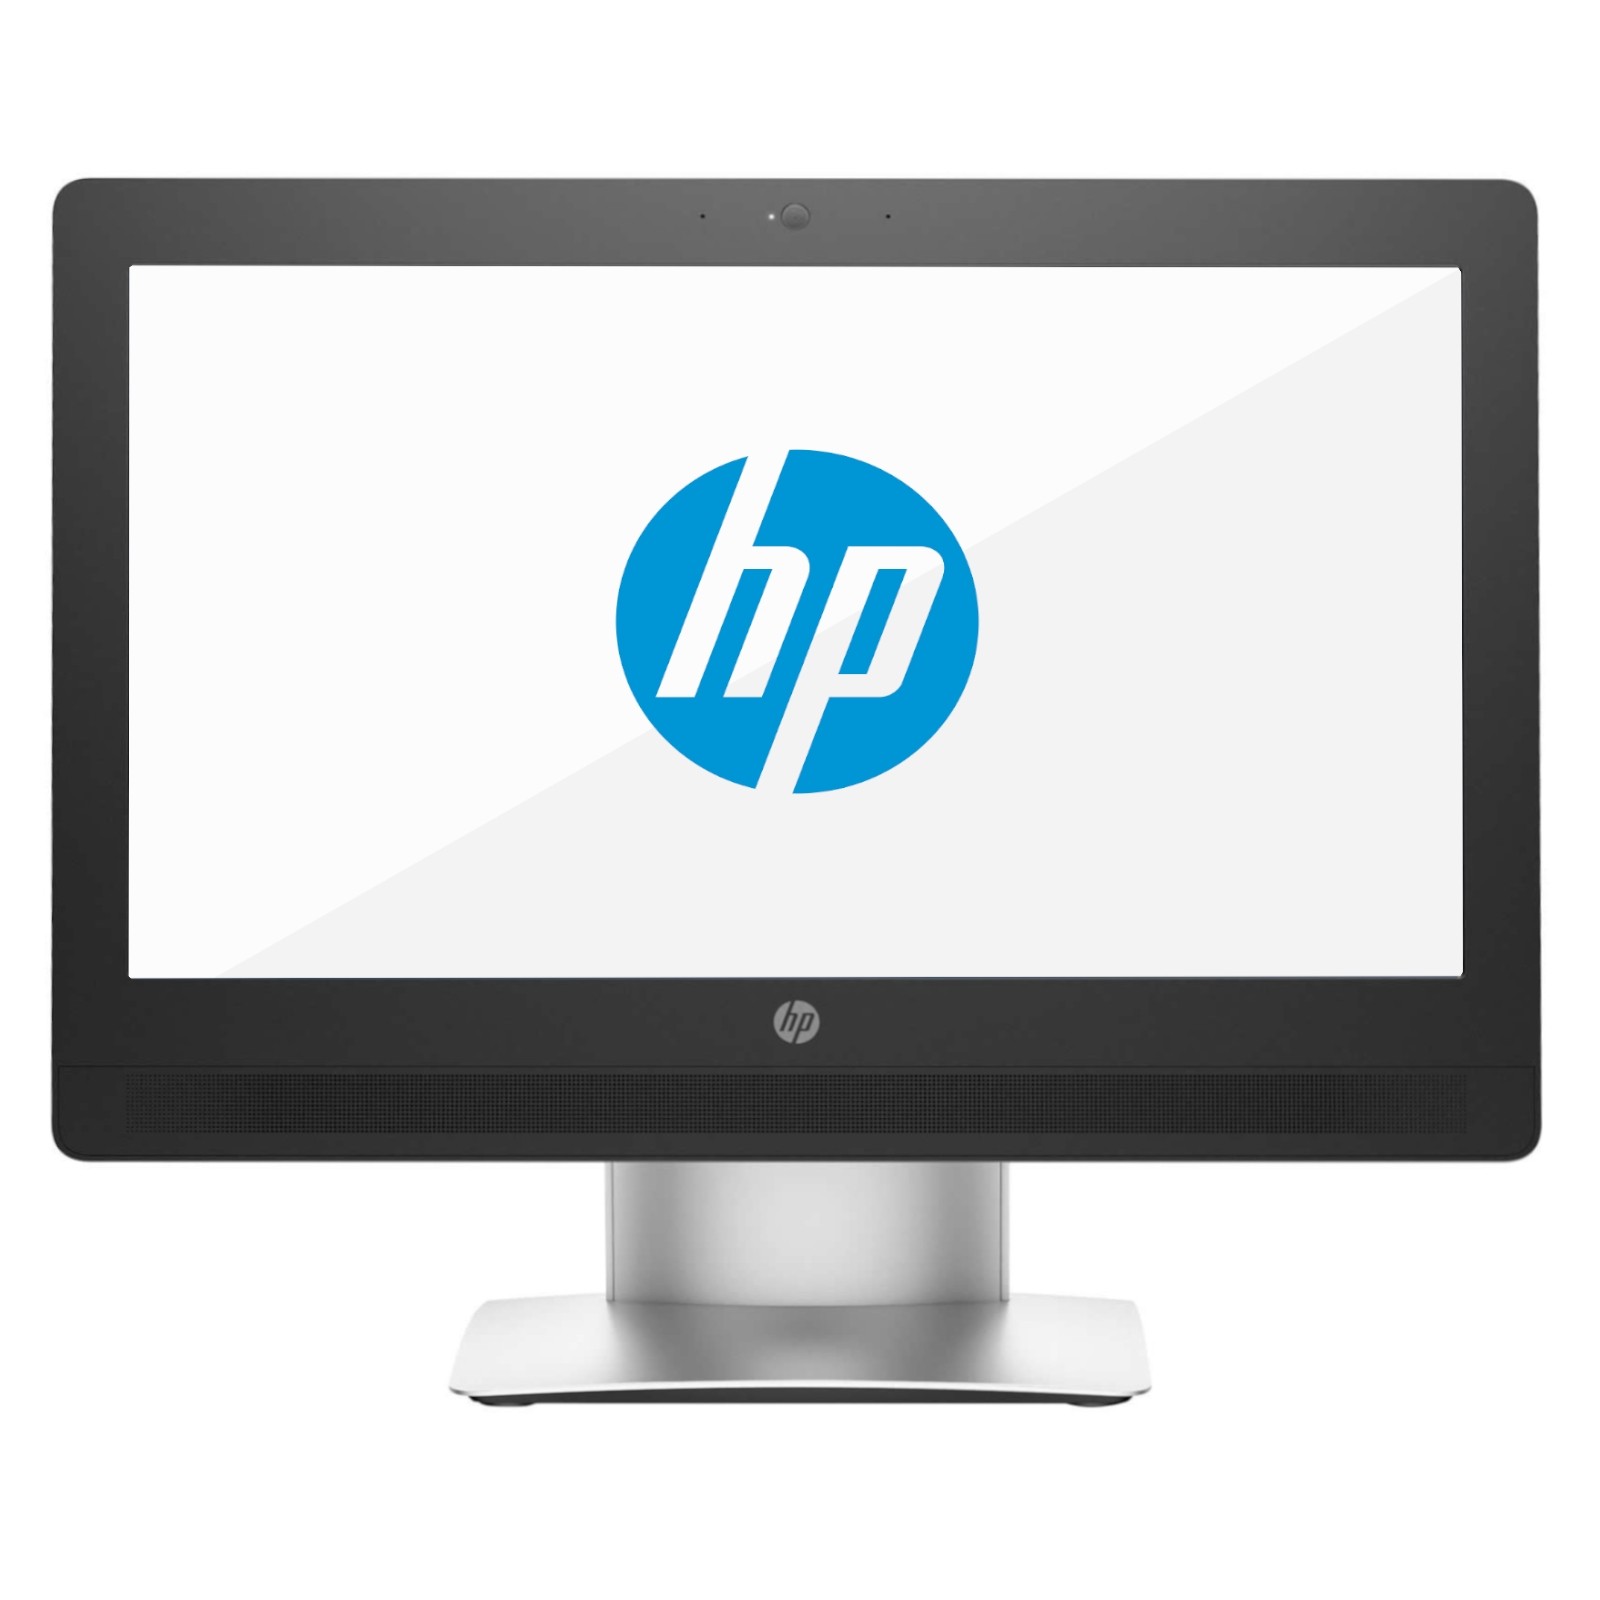 HP ProOne 400 G2 20" Touch All-in-One (AiO) Desktop PC Front